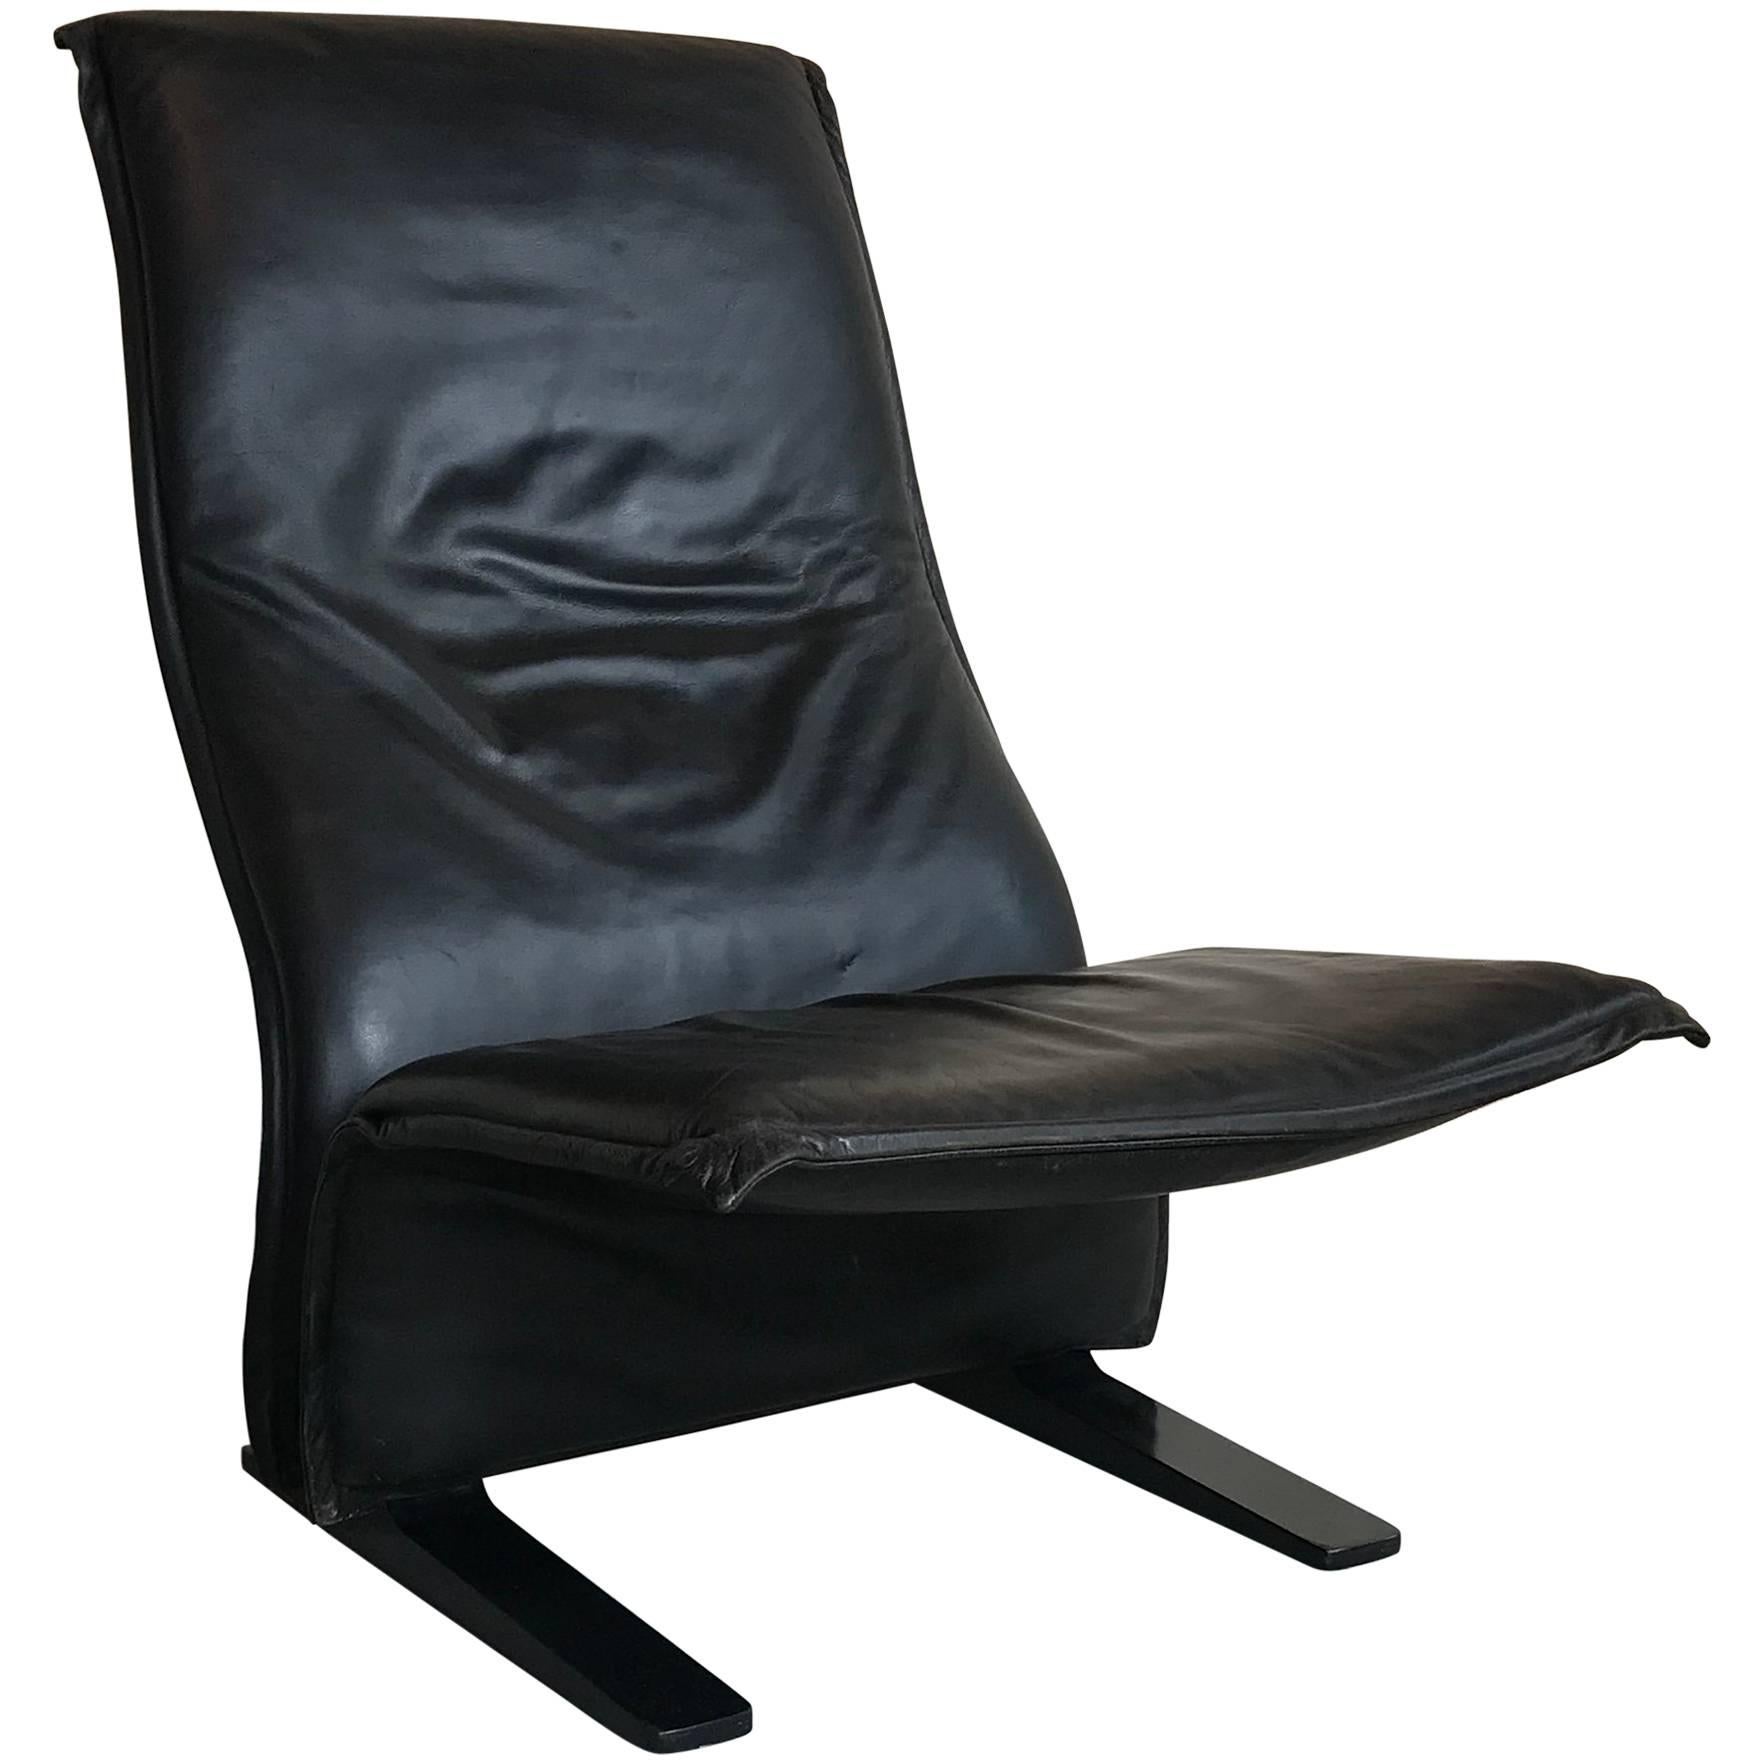 Lounge Chair Artifort Concorde F784 Pierre Paulin, Original Leather Upholstery